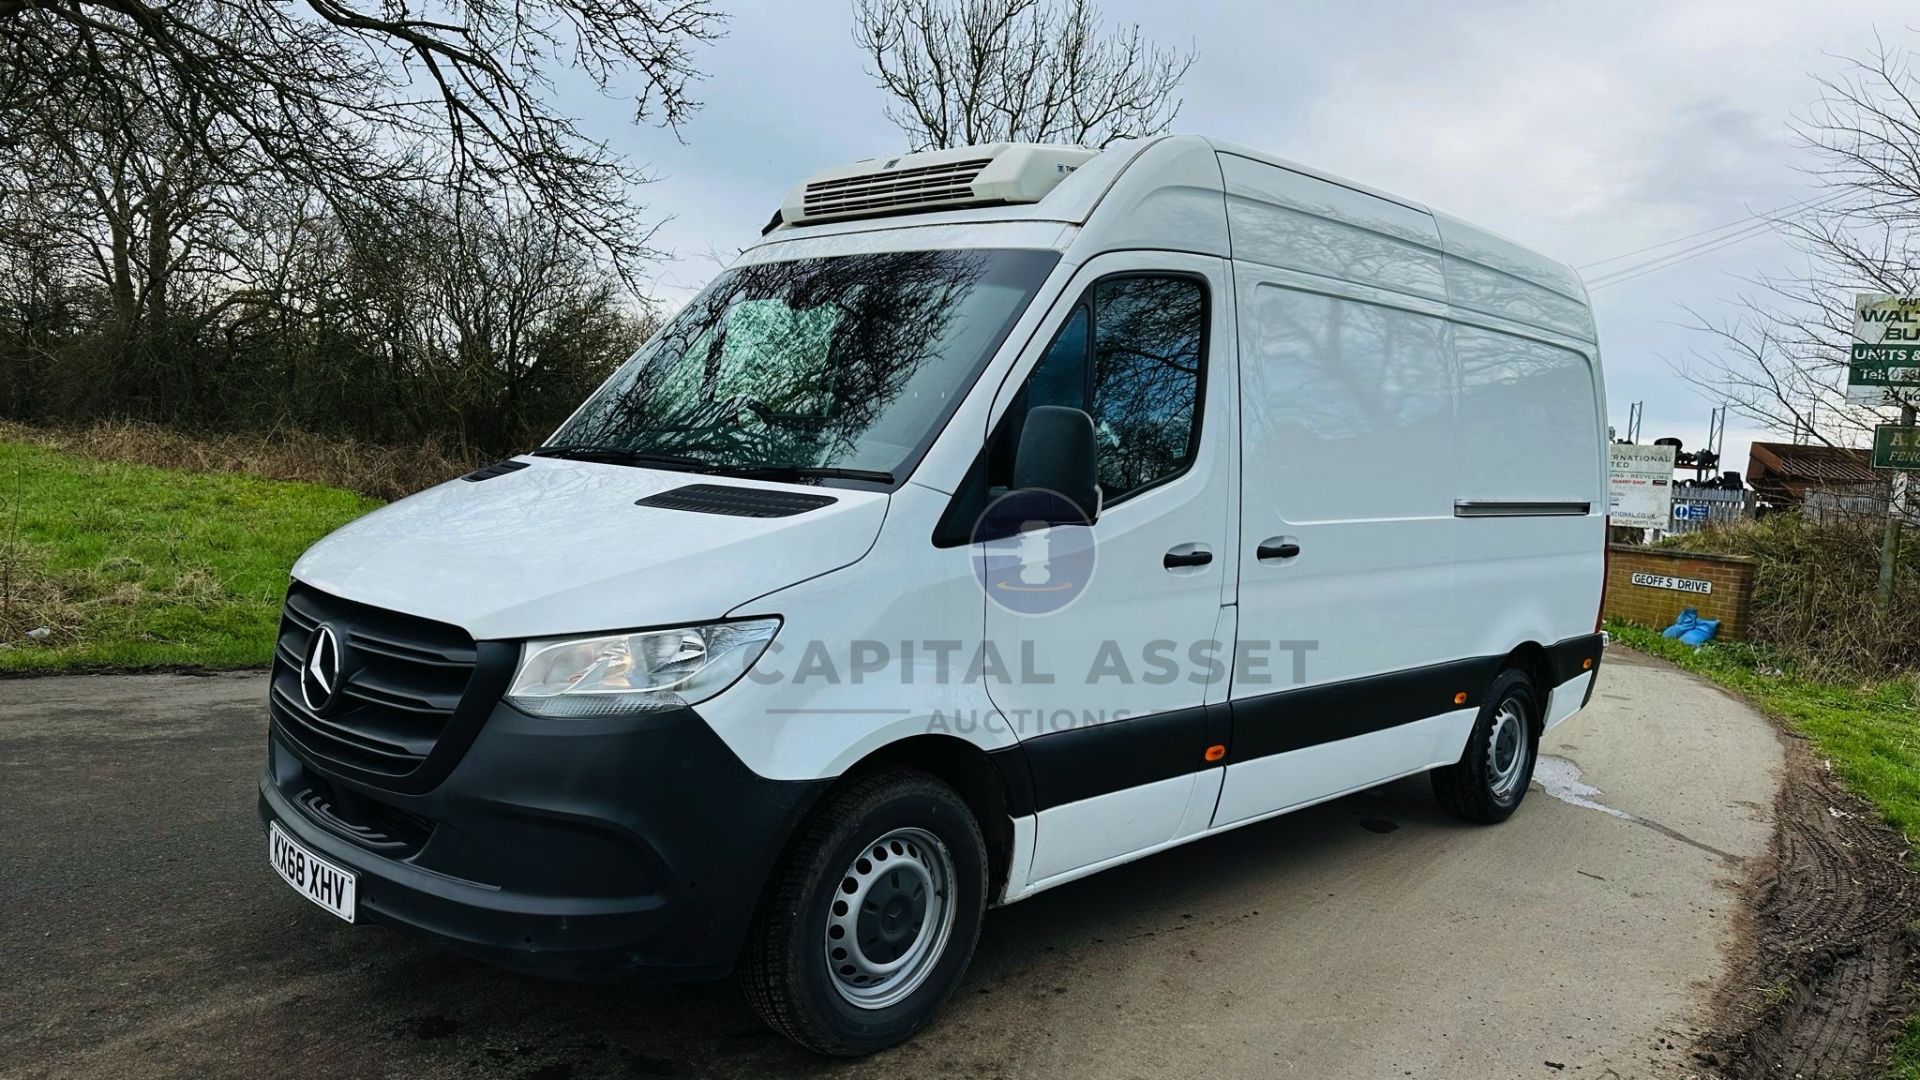 MERCEDES-BENZ SPRINTER 314 CDI *MWB - REFRIGERATED VAN* (2019 - FACELIFT MODEL) *OVERNIGHT STANDBY* - Image 8 of 41